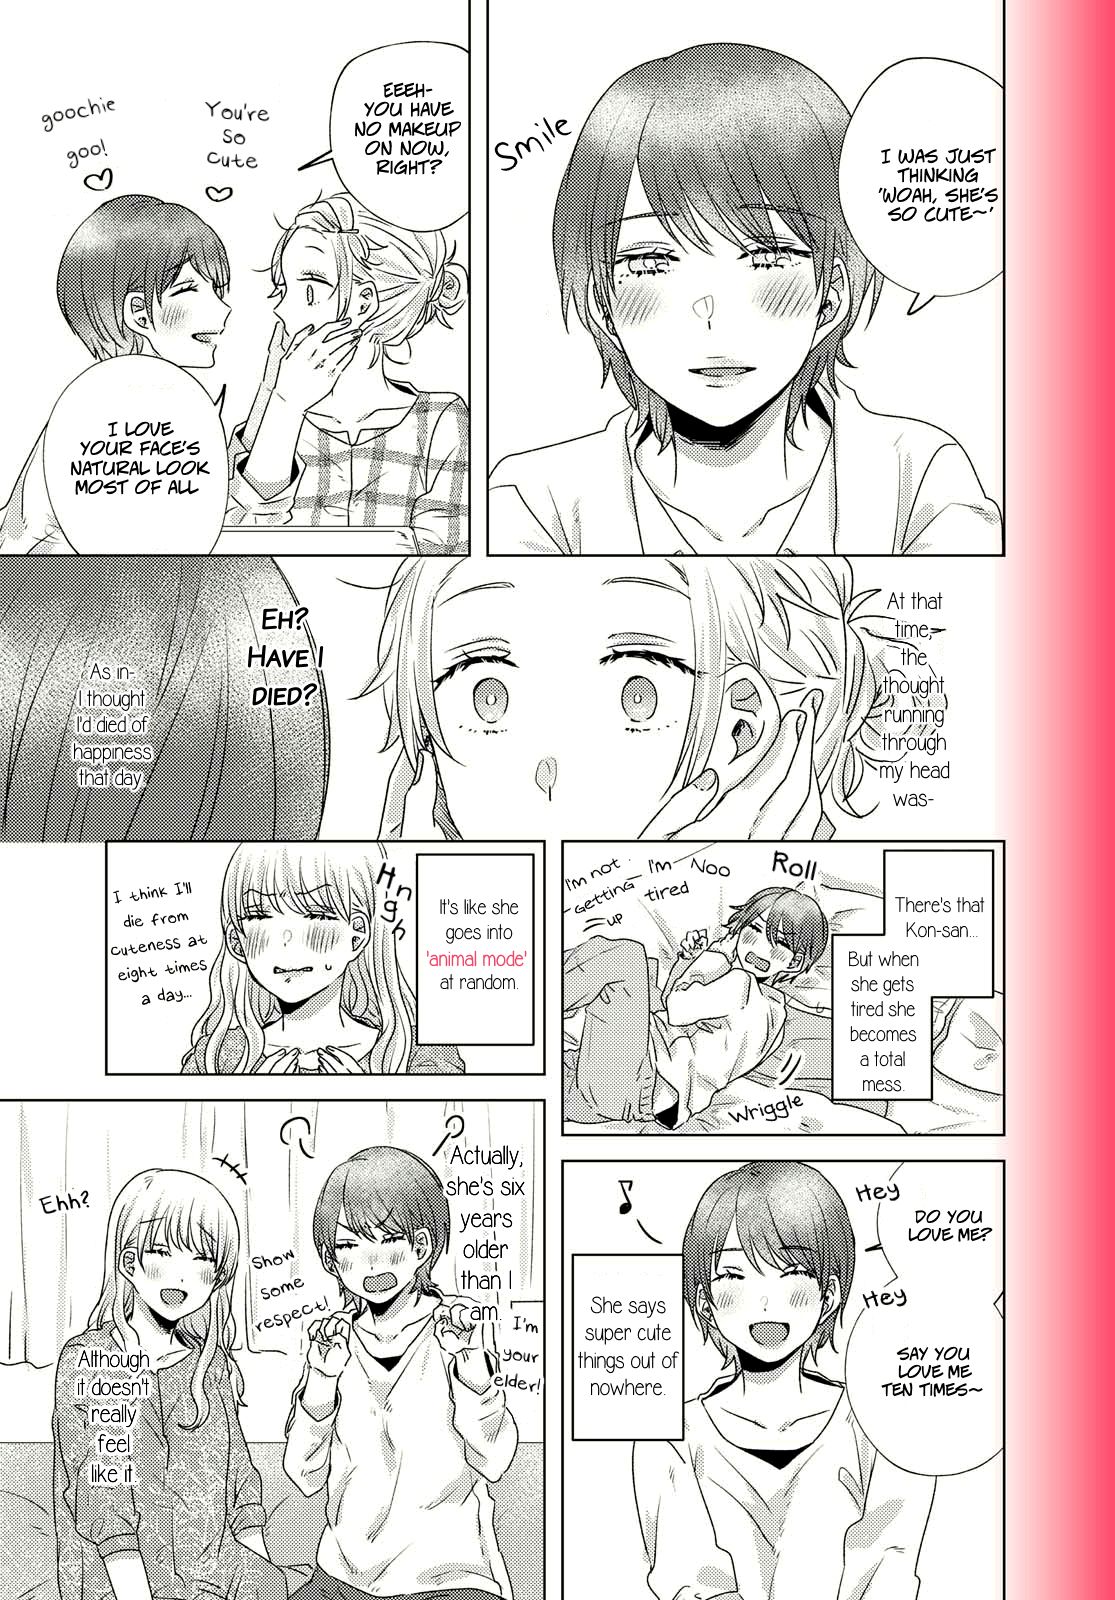 Today, We Continue Our Lives Together Under The Same Roof - Page 3